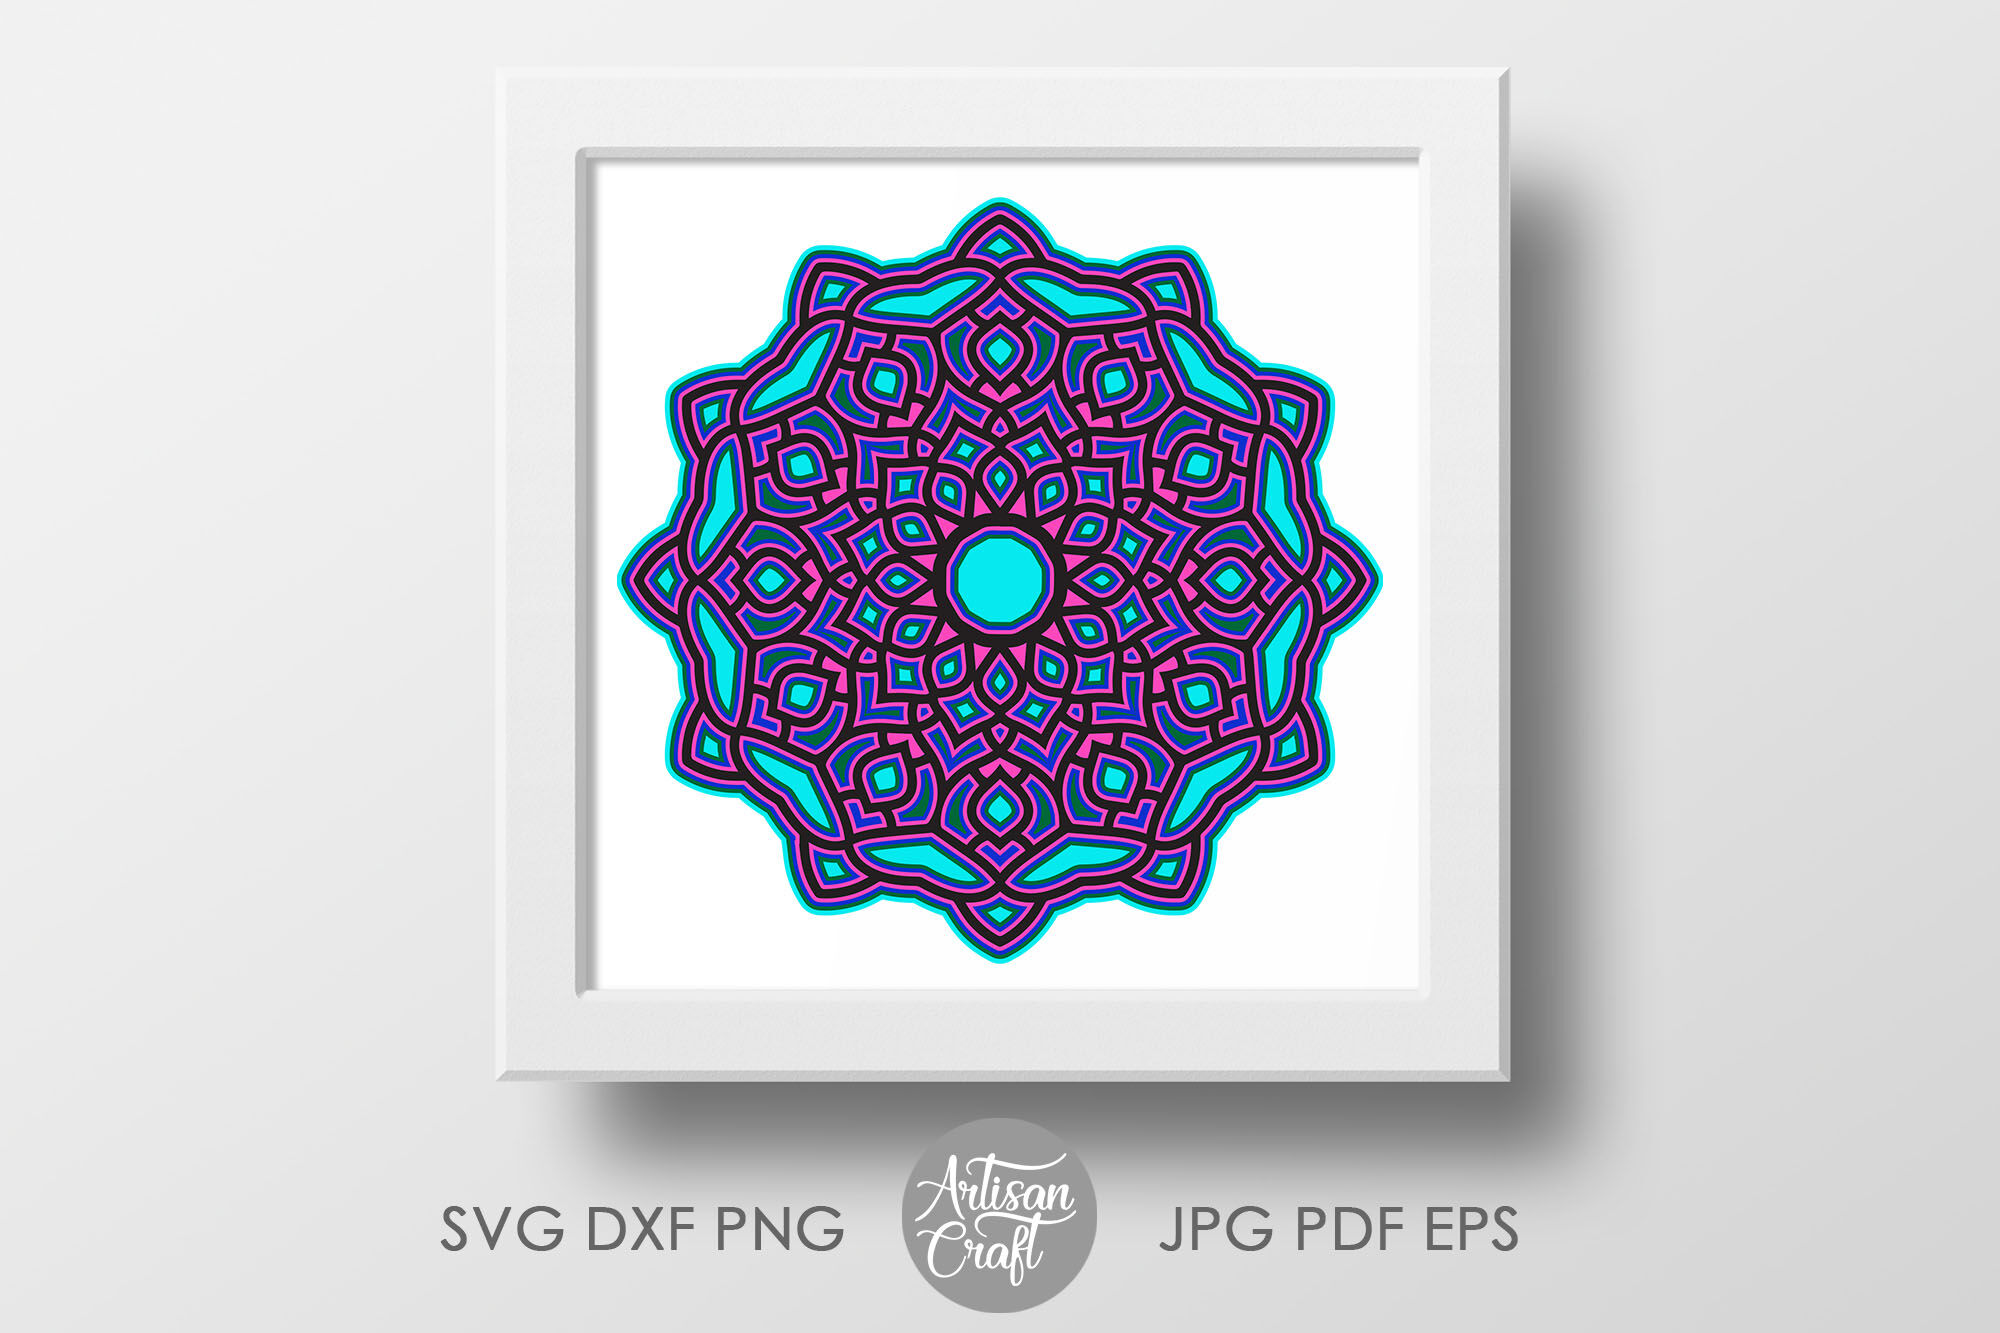 Download 3d Layered Mandala Svg Layered Design Files For Cricut Silhouette C By Artisan Craft Svg Thehungryjpeg Com SVG, PNG, EPS, DXF File